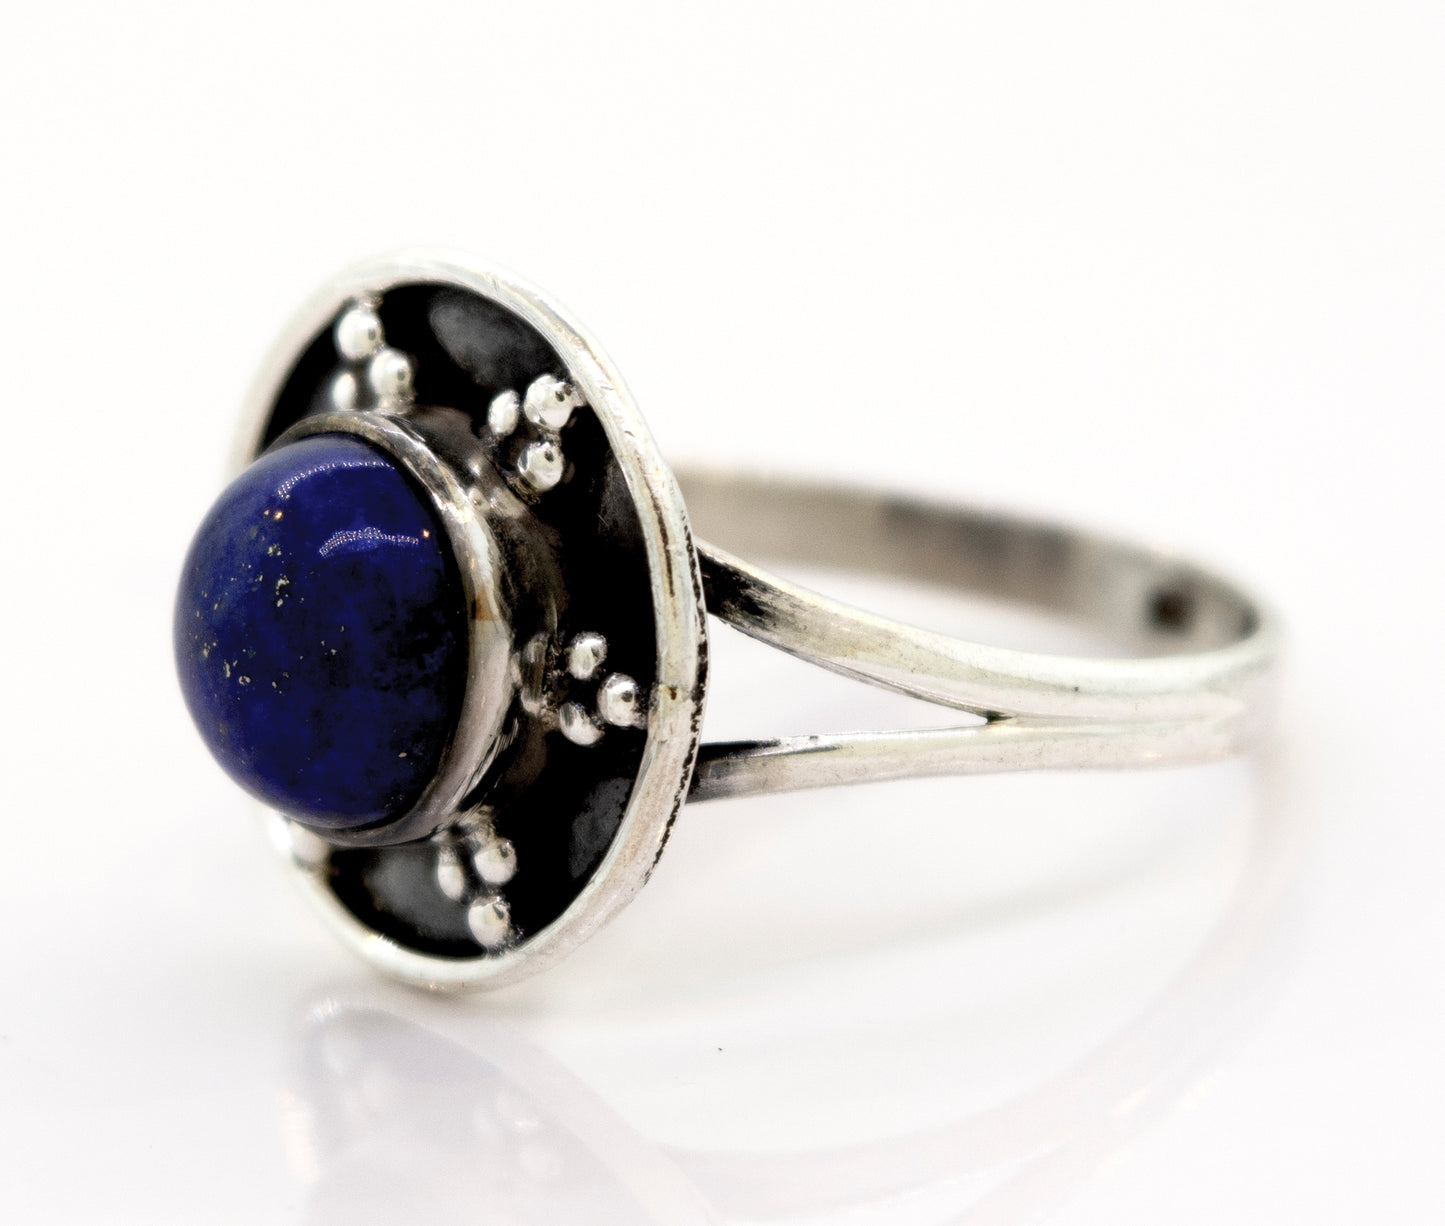 
                  
                    A Gemstone Ring With Unique Oxidized Design featuring a round, dark blue gemstone set in an ornate circular setting with small decorative oxidized silver beads.
                  
                